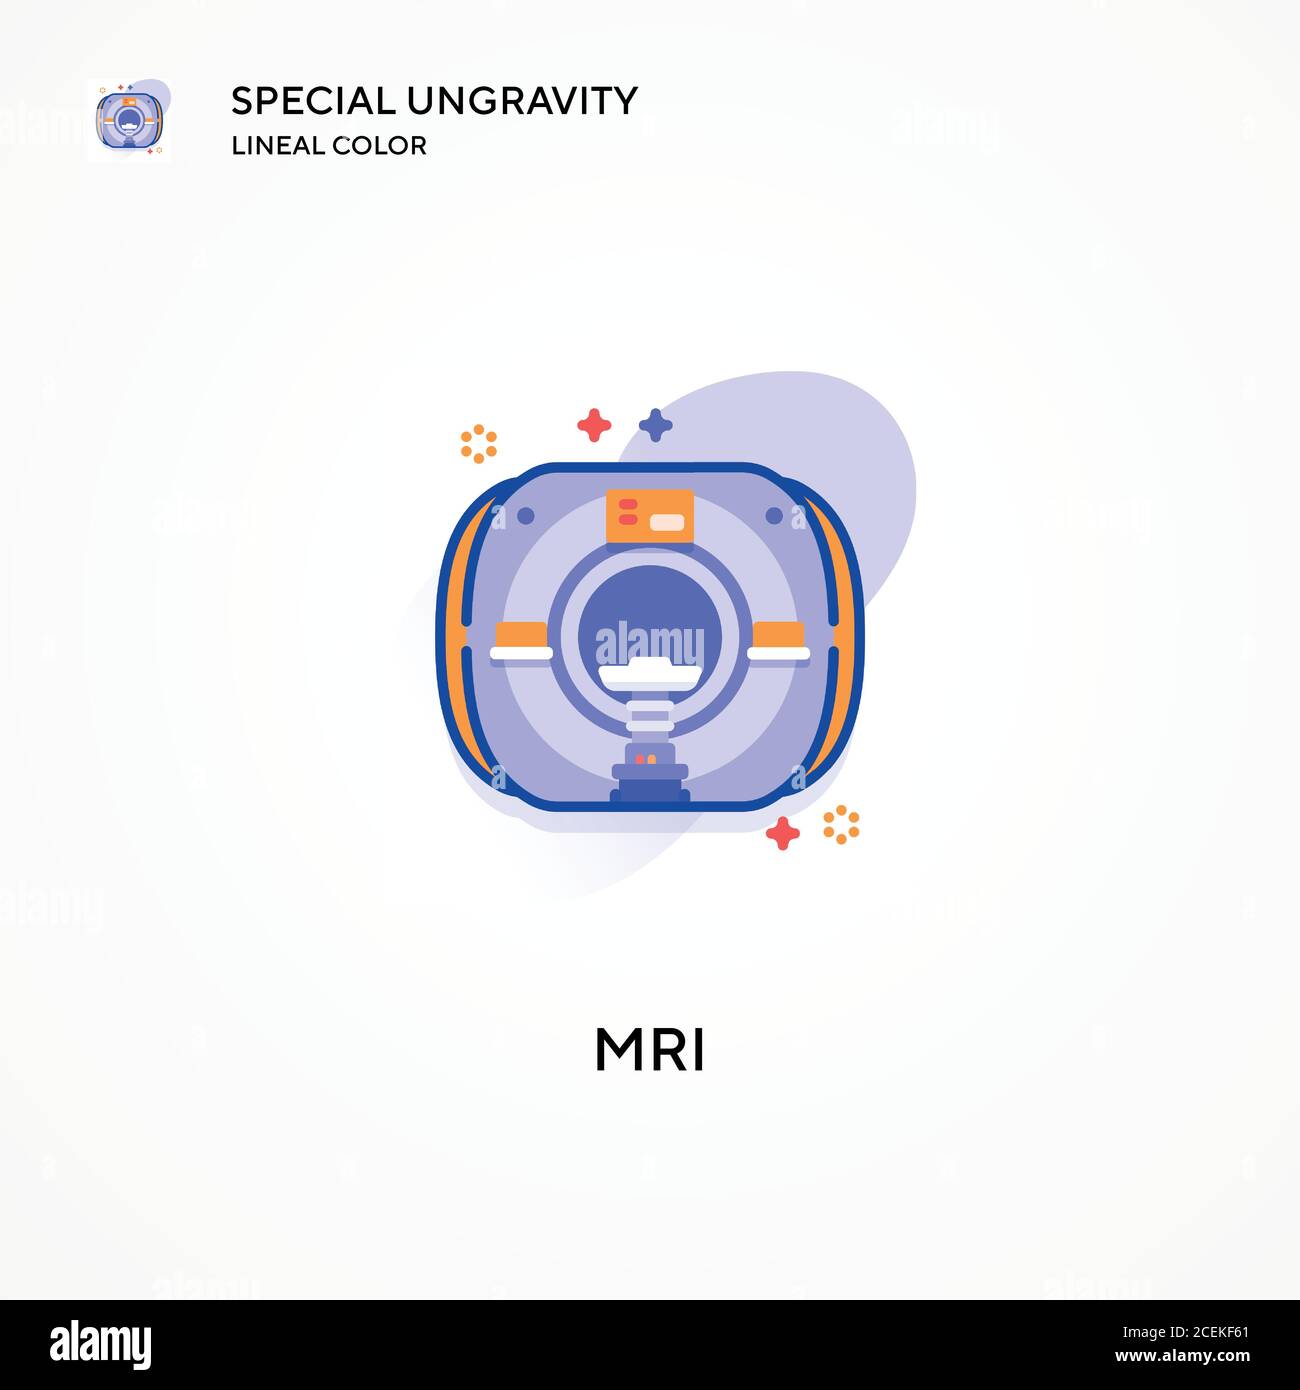 Mri special ungravity lineal color icon. Modern vector illustration concepts. Easy to edit and customize. Stock Vector